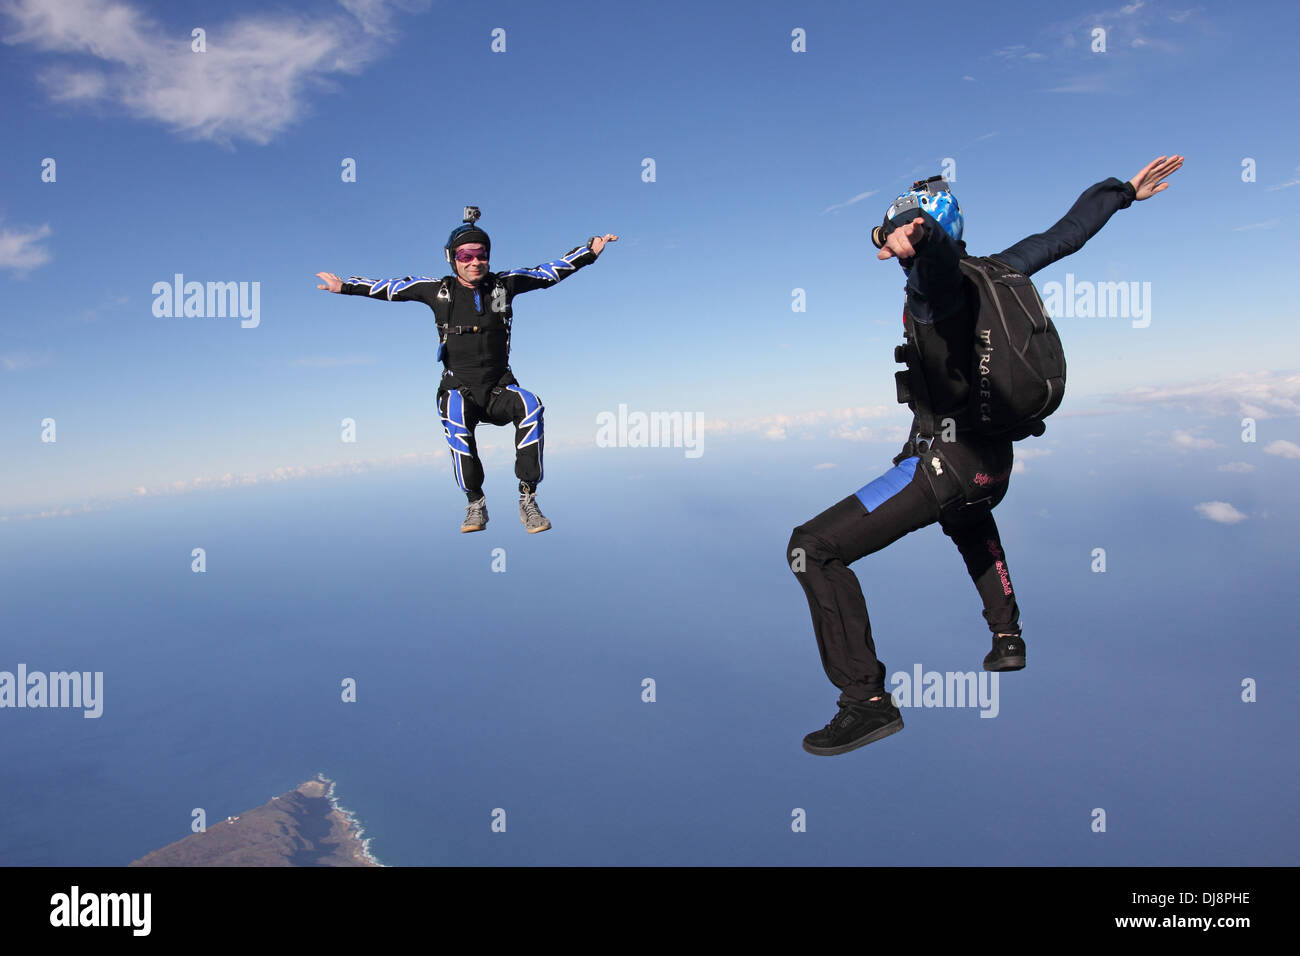 This freefly skydiving team is training together for the next competition. It is fun for all to fly free in the blue sky. Stock Photo